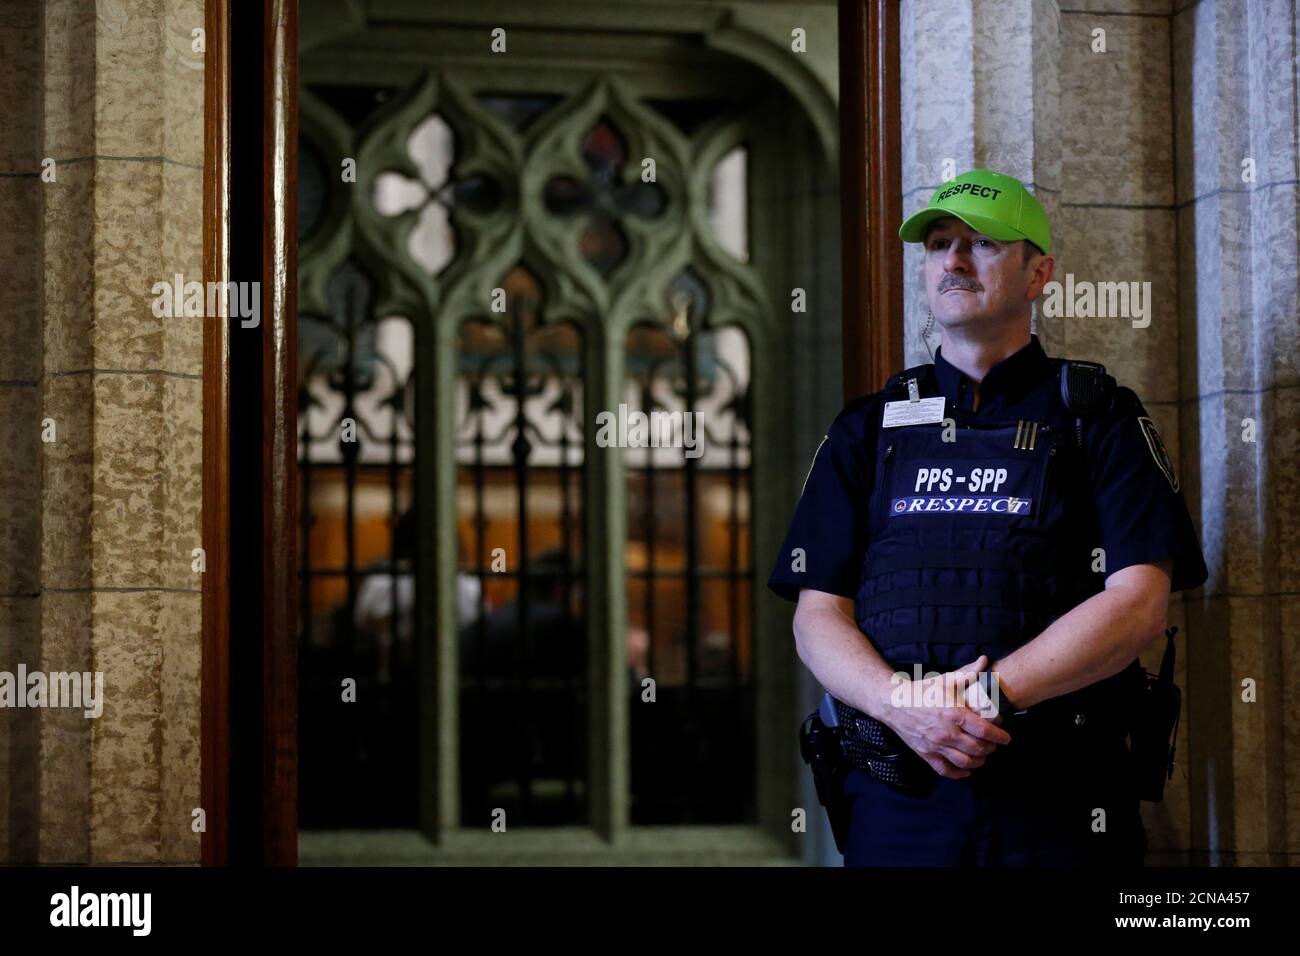 A Parliamentary Protective Service (PPS) officer wears a ball cap and a sticker with the word 'Respect' as part of an ongoing labour dispute, on Parliament Hill in Ottawa, Ontario, Canada May 18, 2017. REUTERS/Chris Wattie Stock Photo